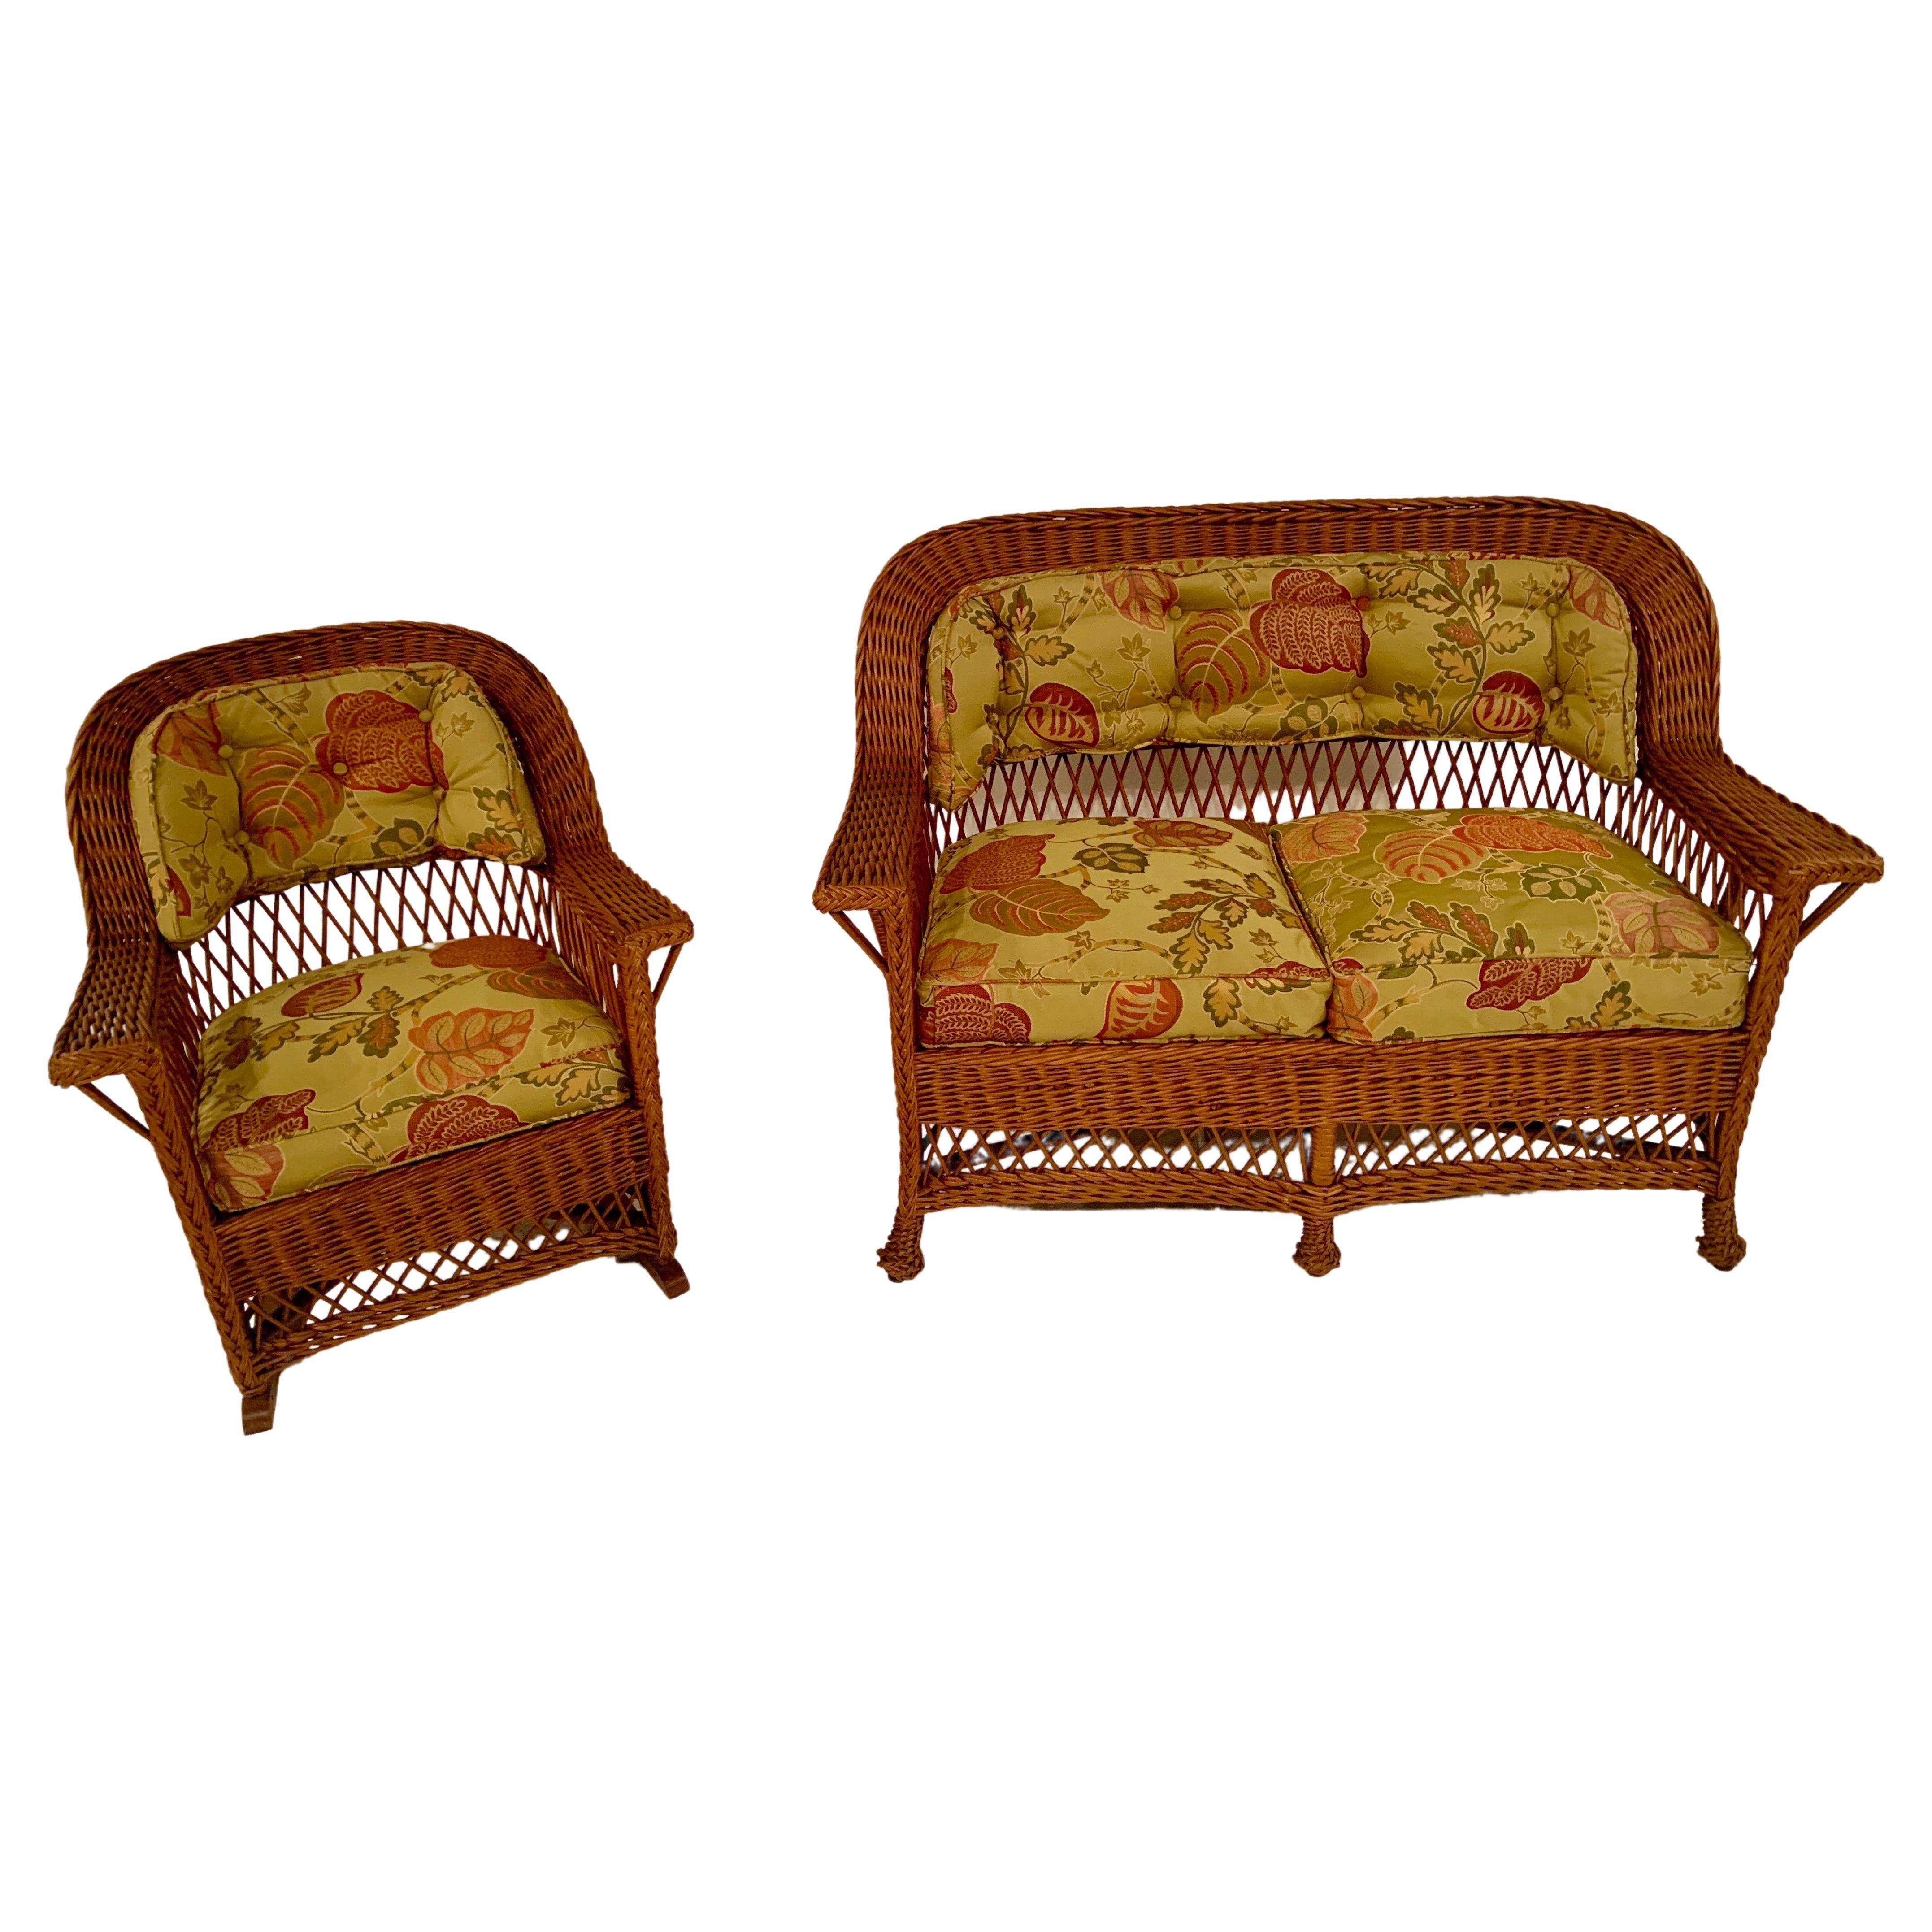 A matching Bar Harbor Style Love Seat and matching Rocking Chair from a Rhode Island Estate, American ,C. 1910.
They are presumably made by The Heywood WakefieldCompany based on the quality of their workmanship. The pieces are in a beautiful all